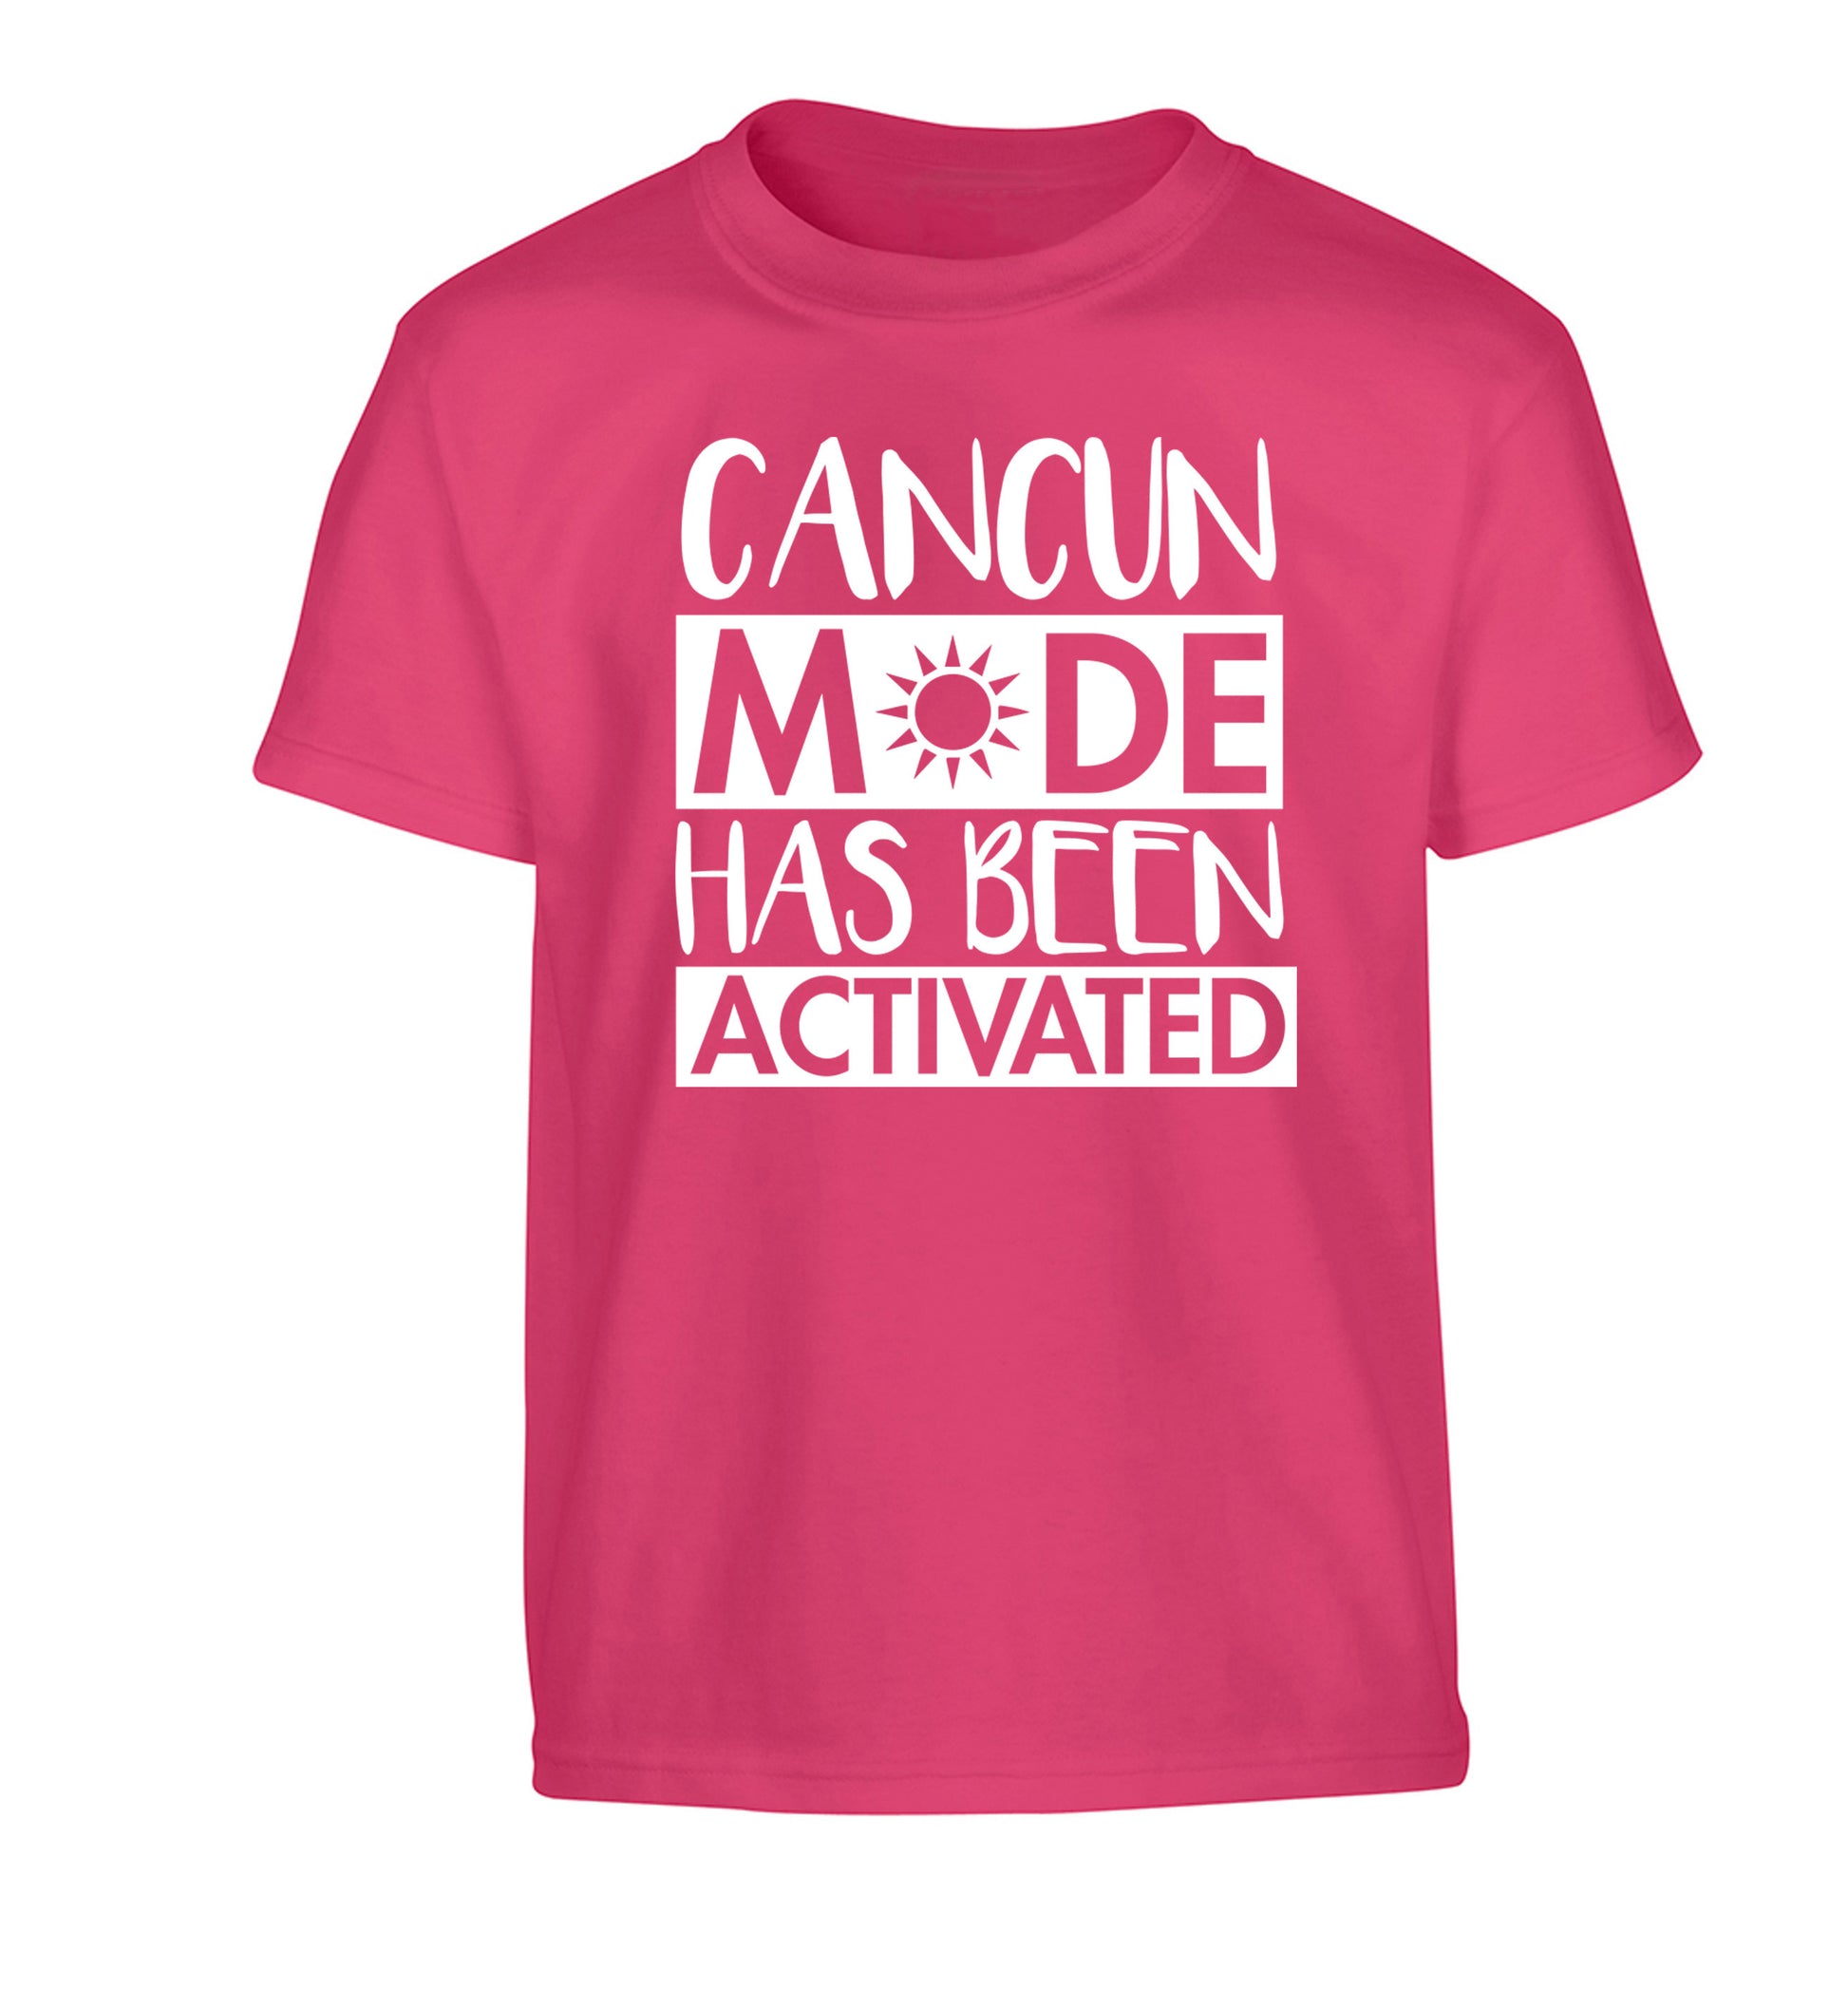 Cancun mode has been activated Children's pink Tshirt 12-14 Years